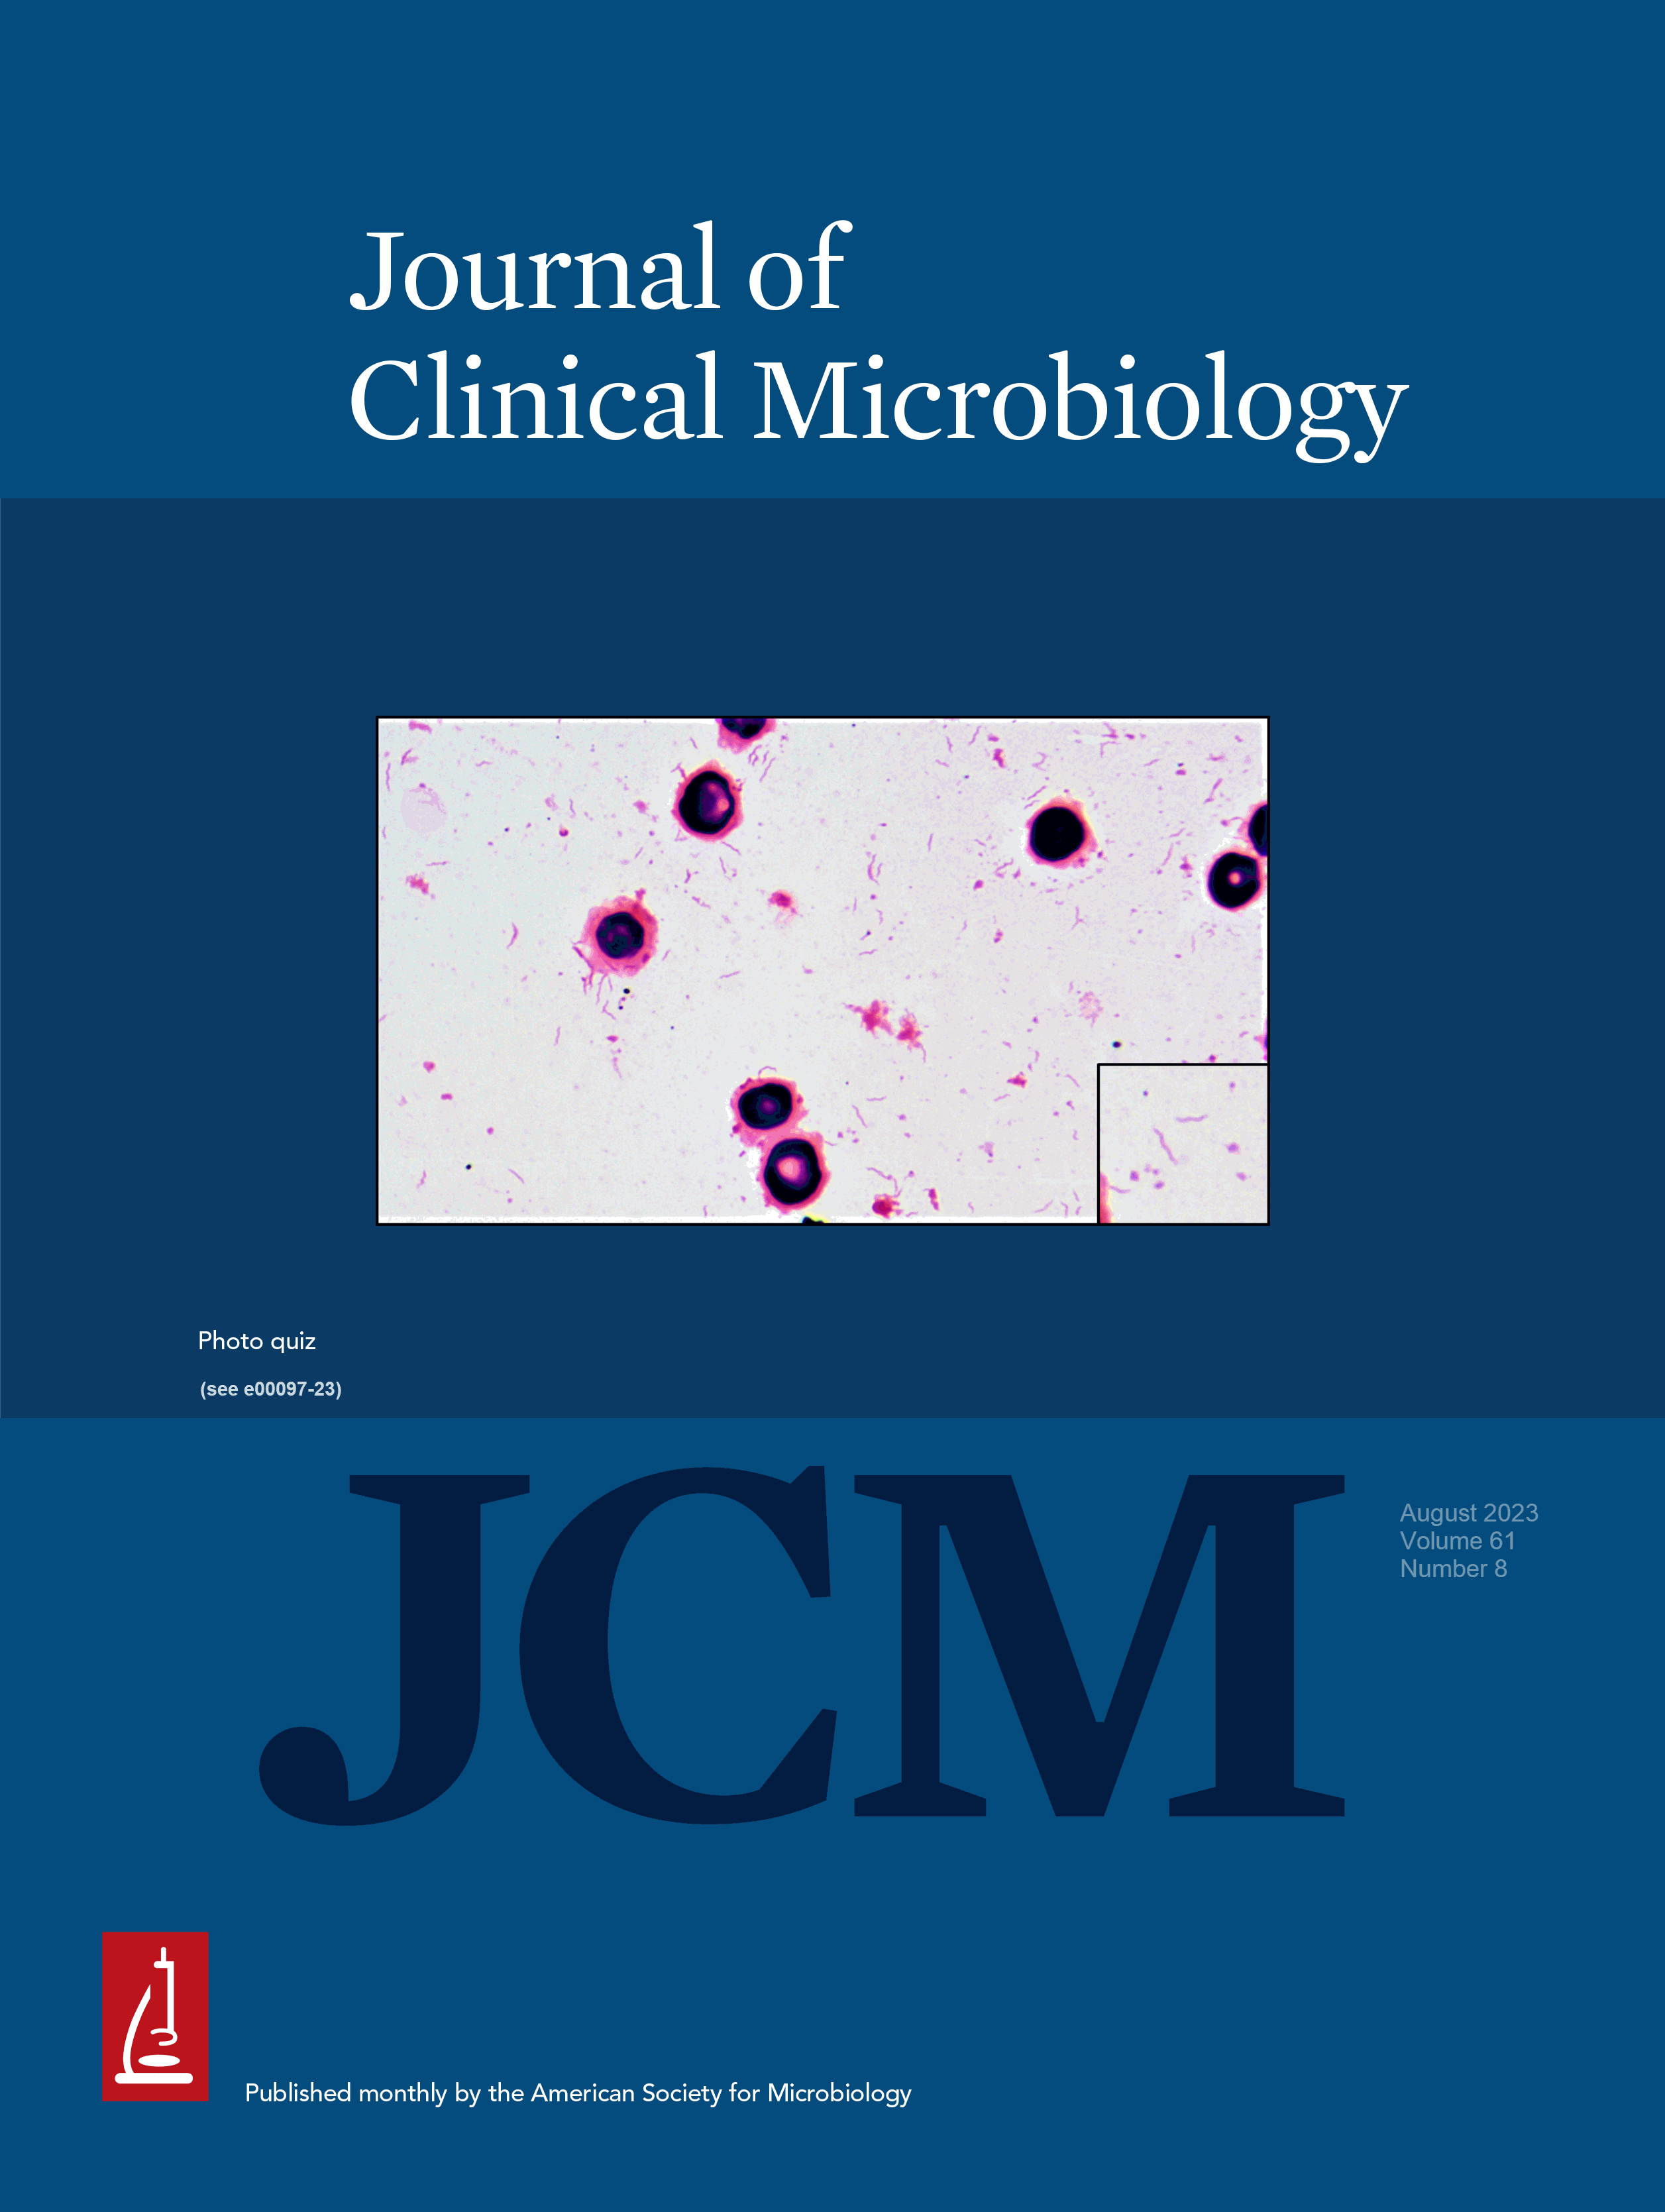 The Brief Case: Vaccine strain herpes zoster ophthalmicus and meningoencephalitis in an immunocompetent child